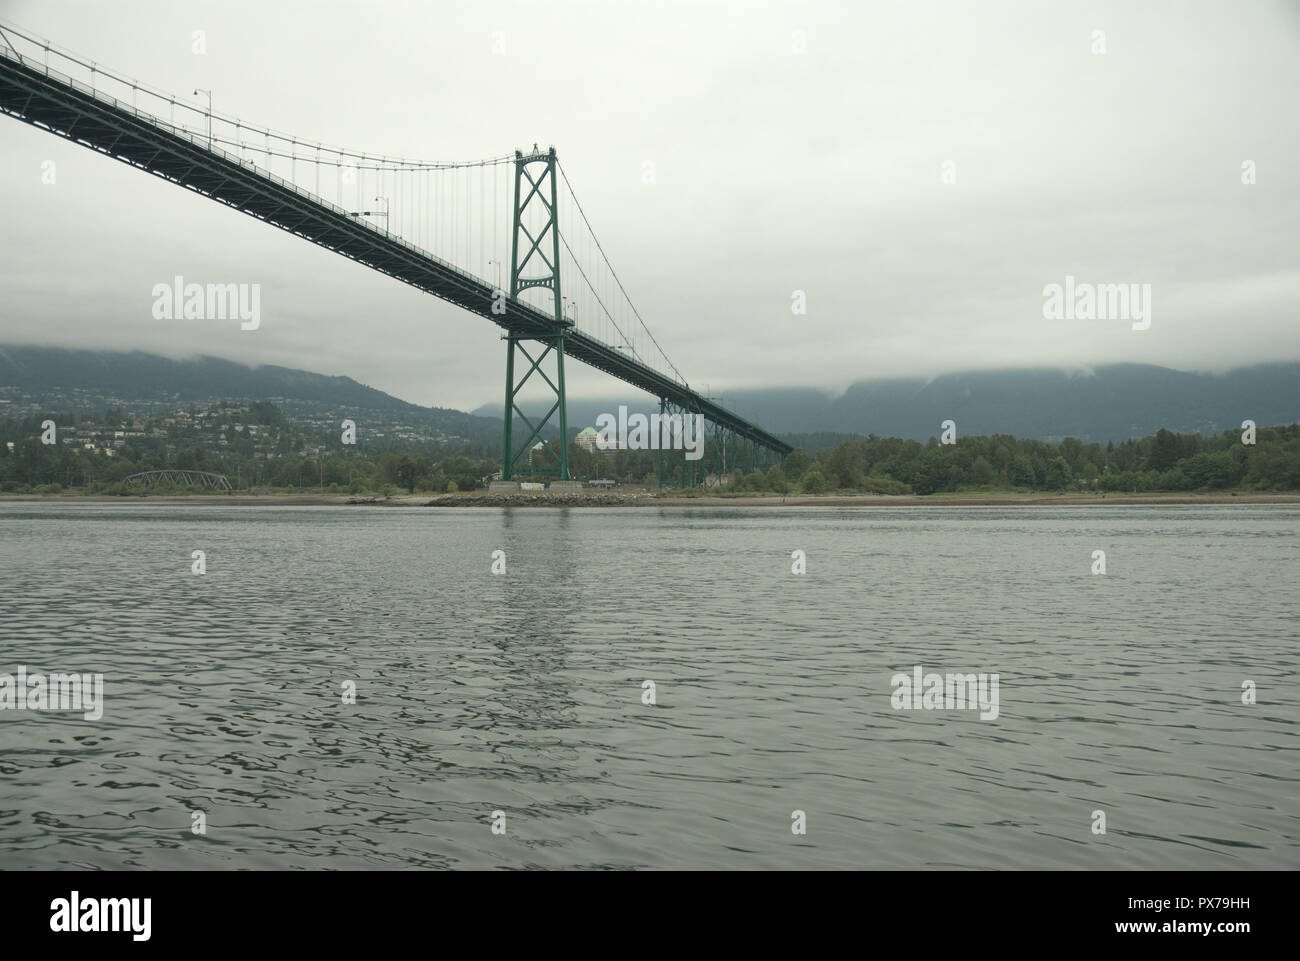 Under gray cloudy skies, the Lions Gate Bridge spans Burrard Inlet from Stanley Park in Vancouver to North Vancouver, British Columbia, Canada Stock Photo